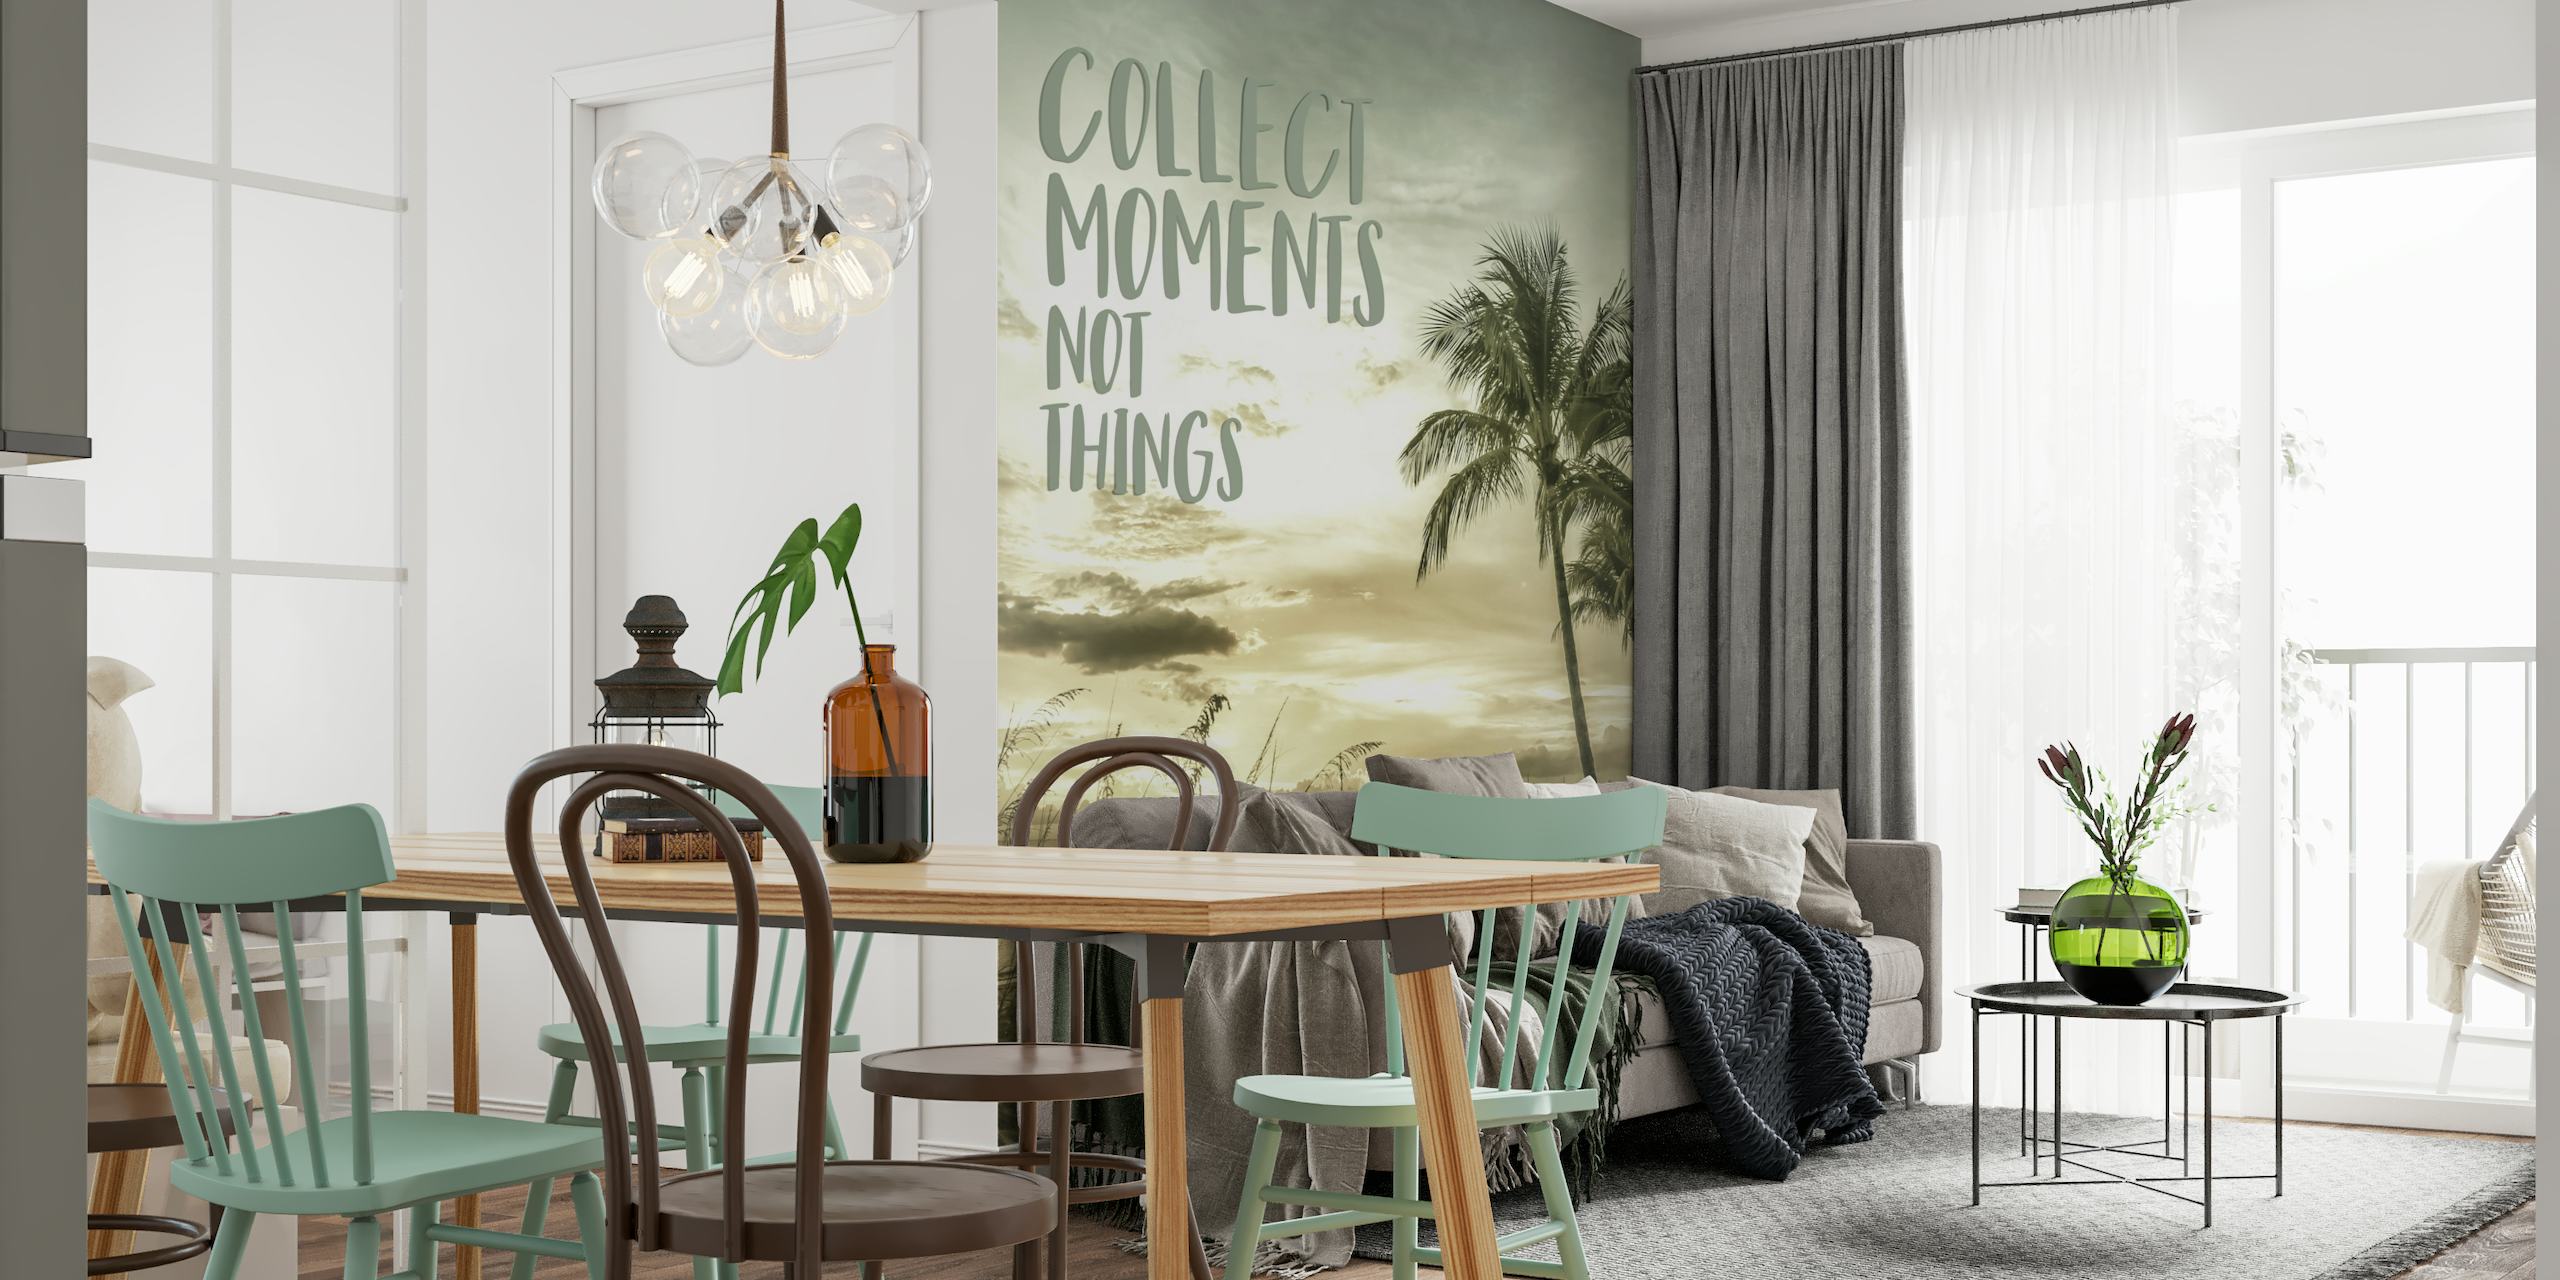 Collect moments not things | Sunset tapeta